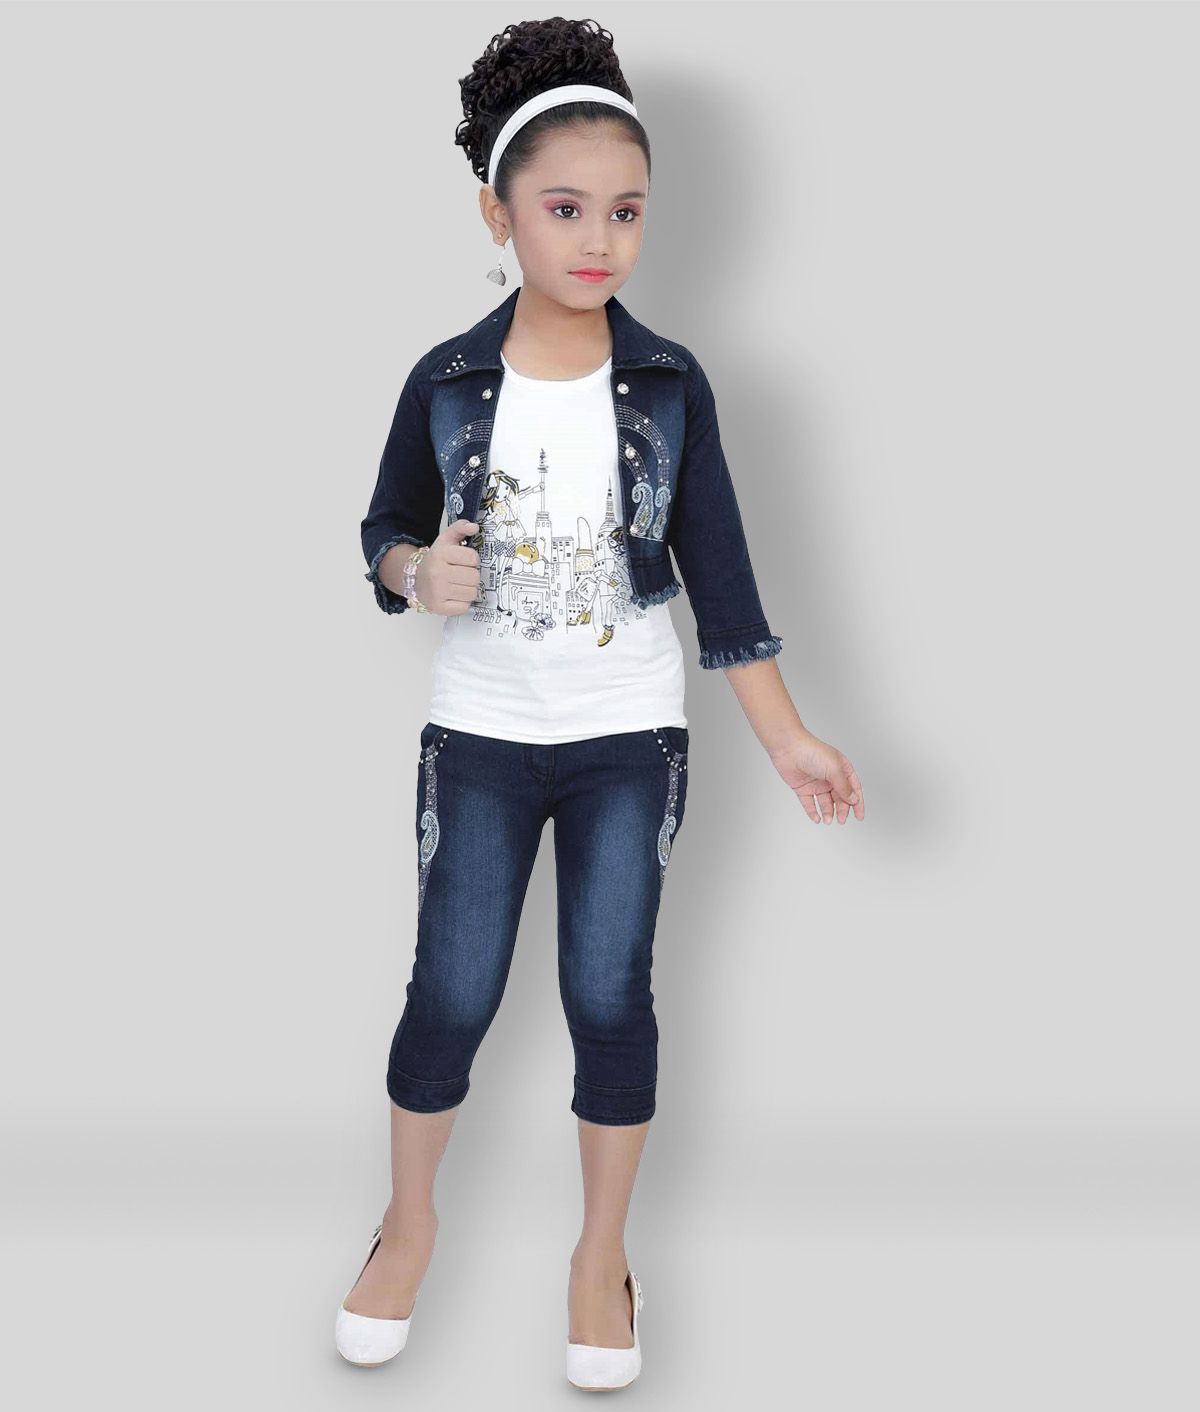     			Arshia Fashions - Black Denim Girl's Top With Jacket With Capris ( Pack of 1 )